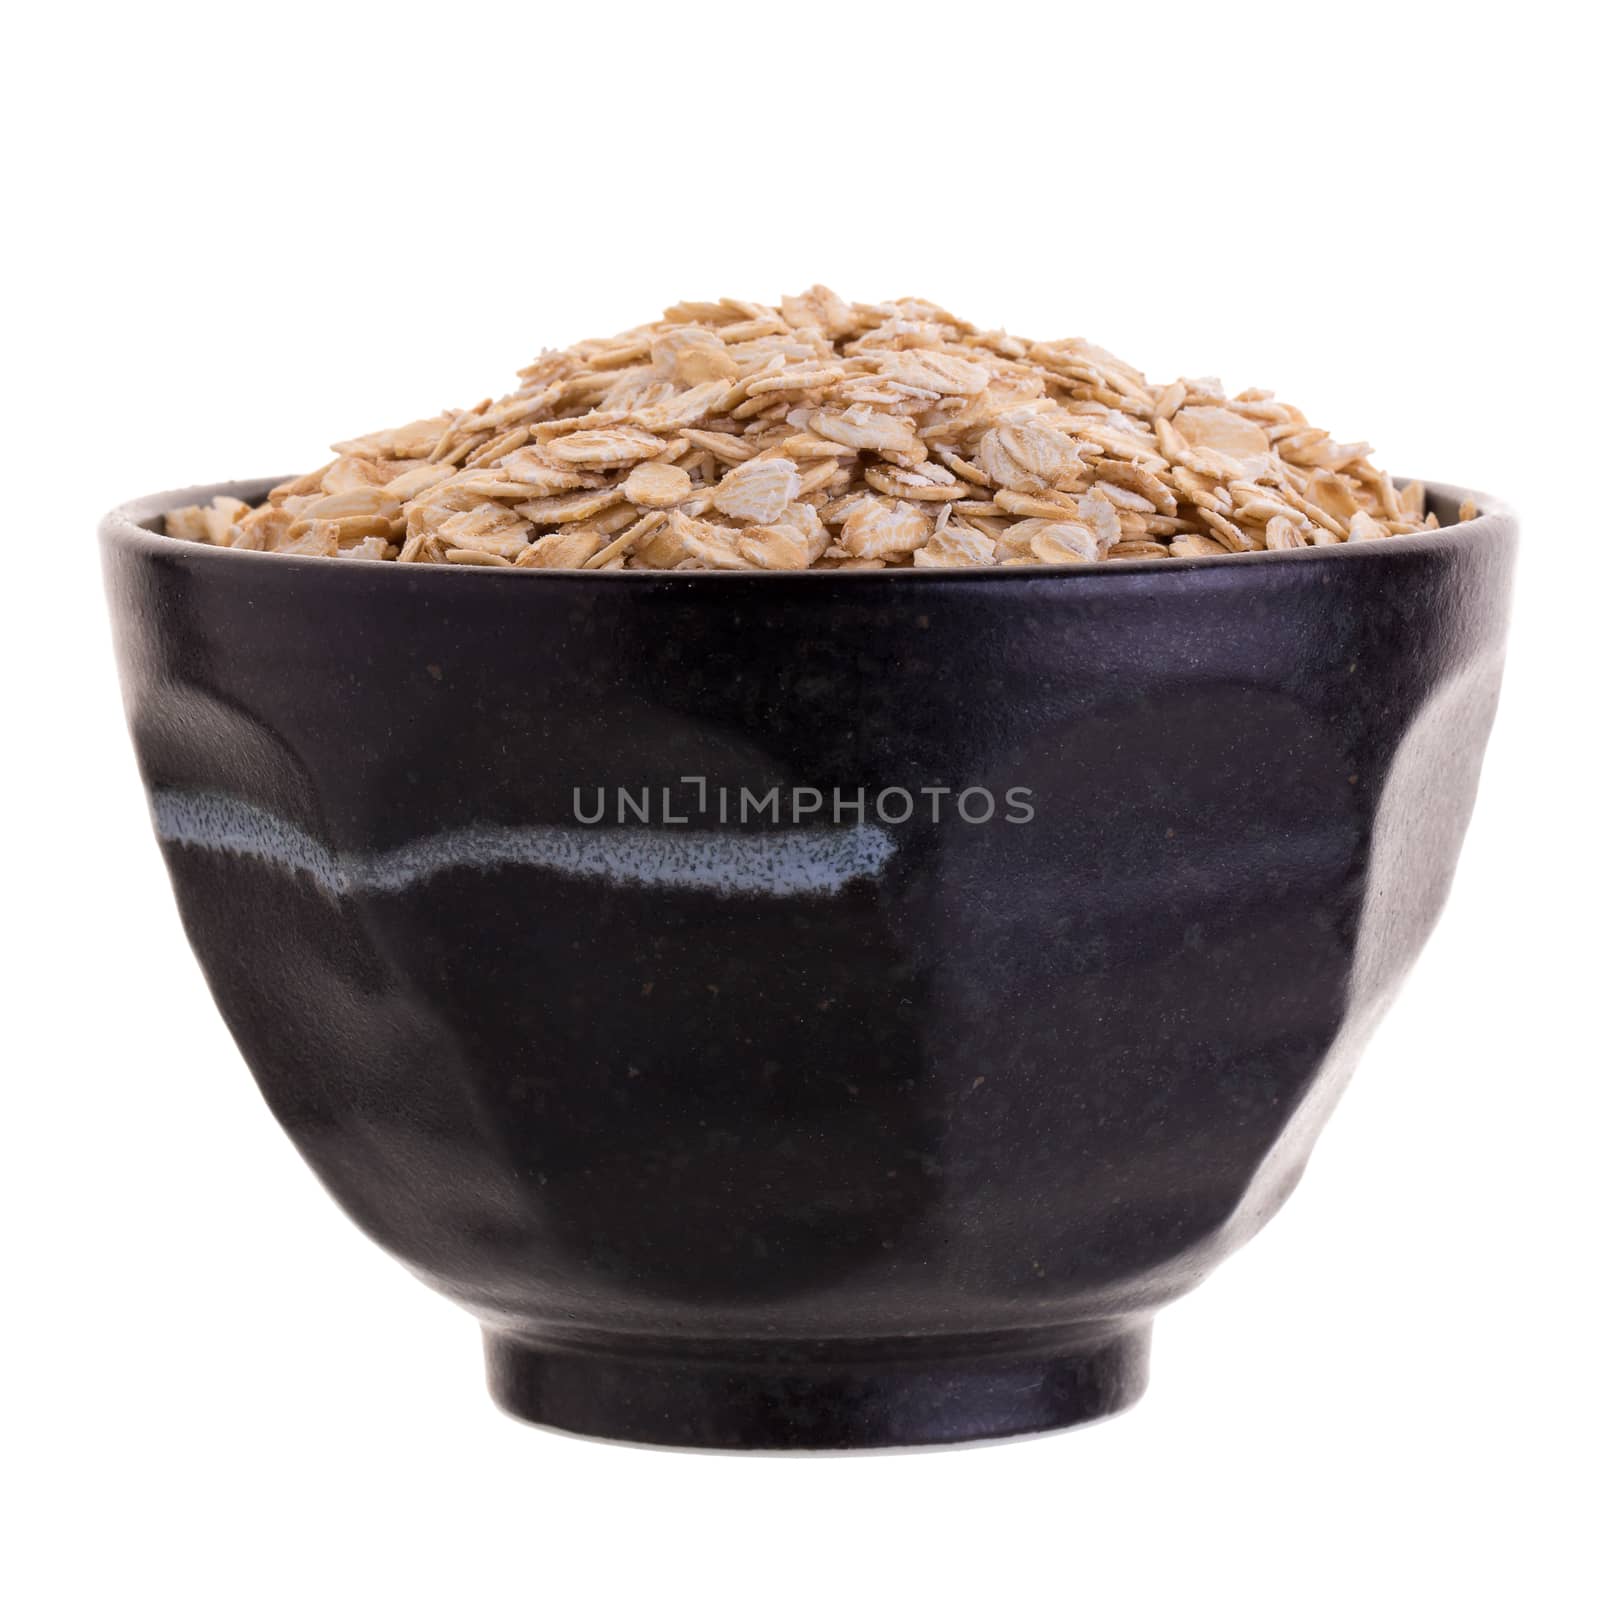 Oat in Black bowl isolated on a white background.